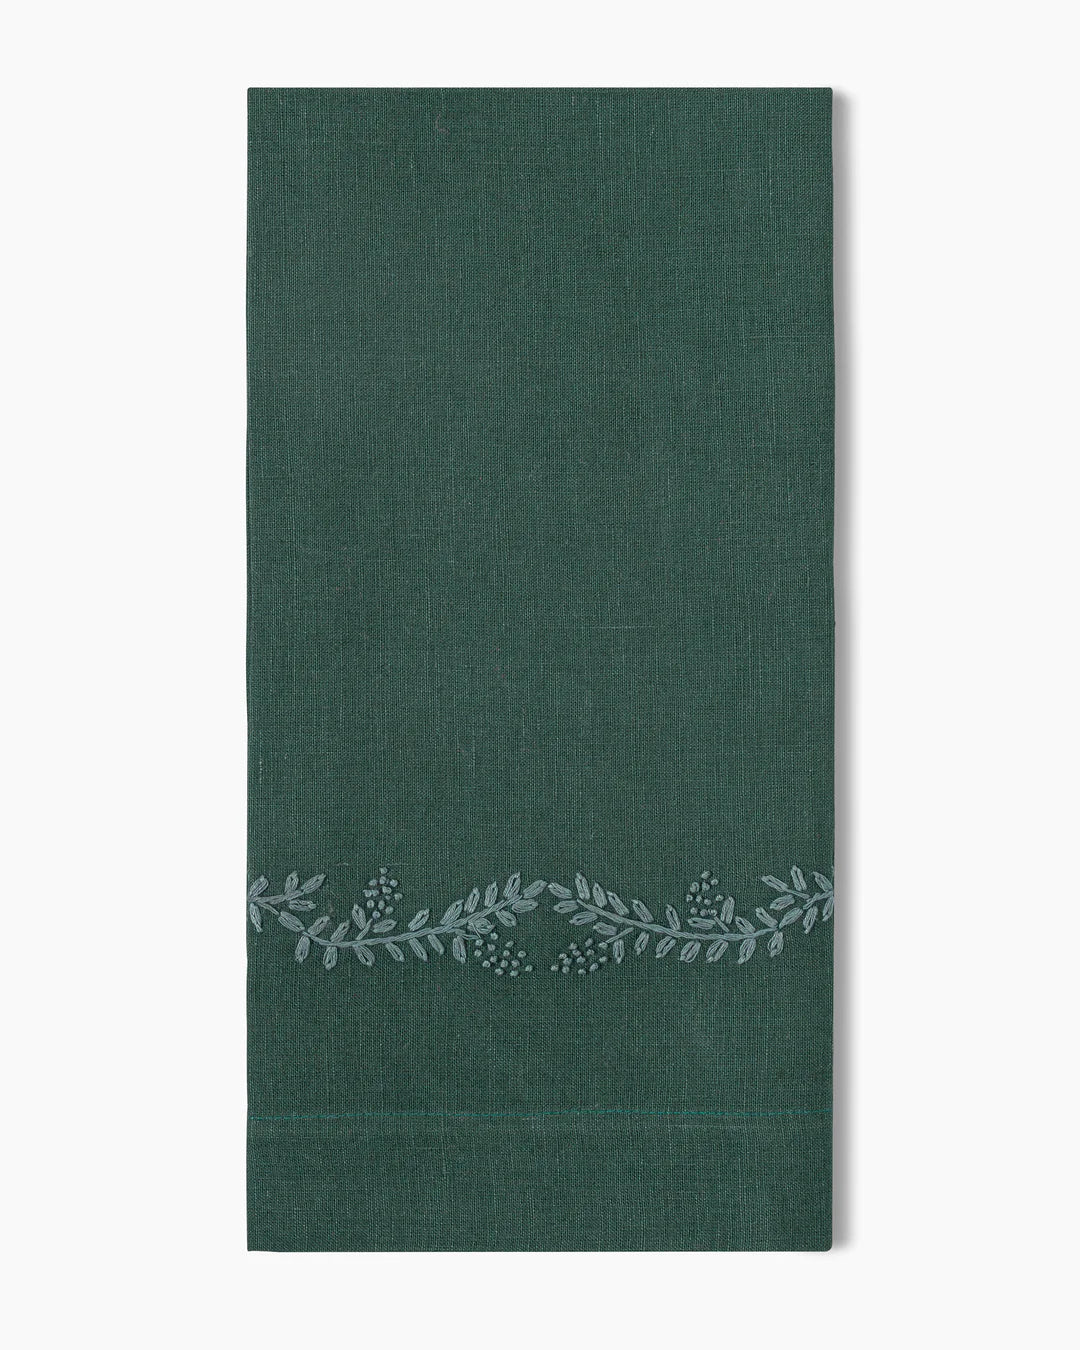 Prism Vine Linen Hand Towels in Peacock, Set of Two